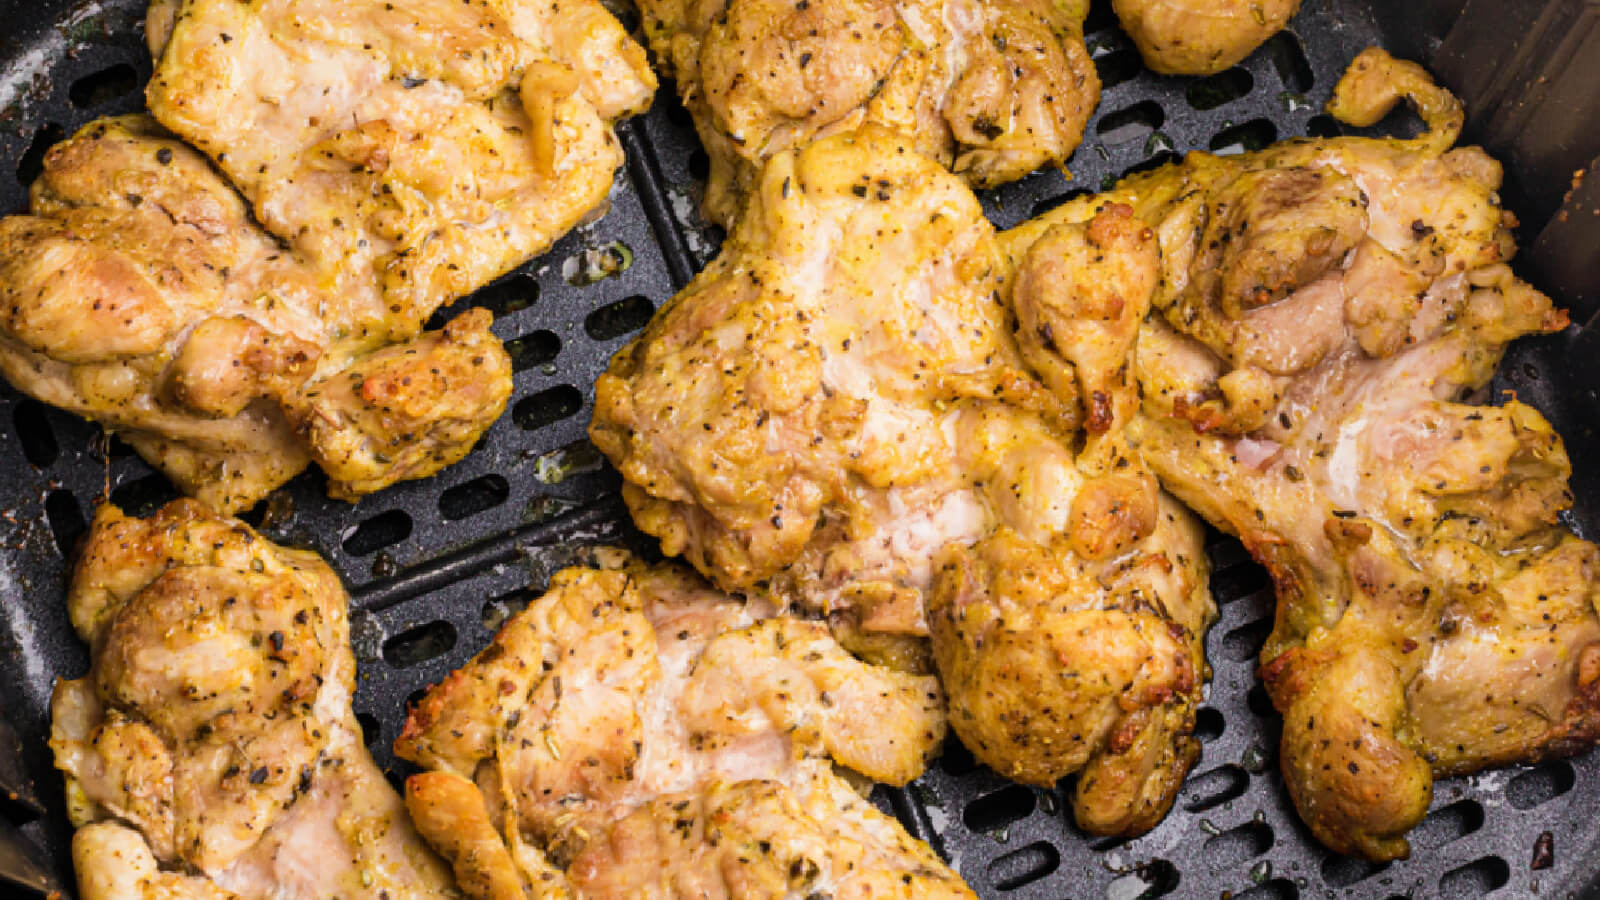 lemon pepper chicken thighs in the basket of the air fryer, ready to serve.